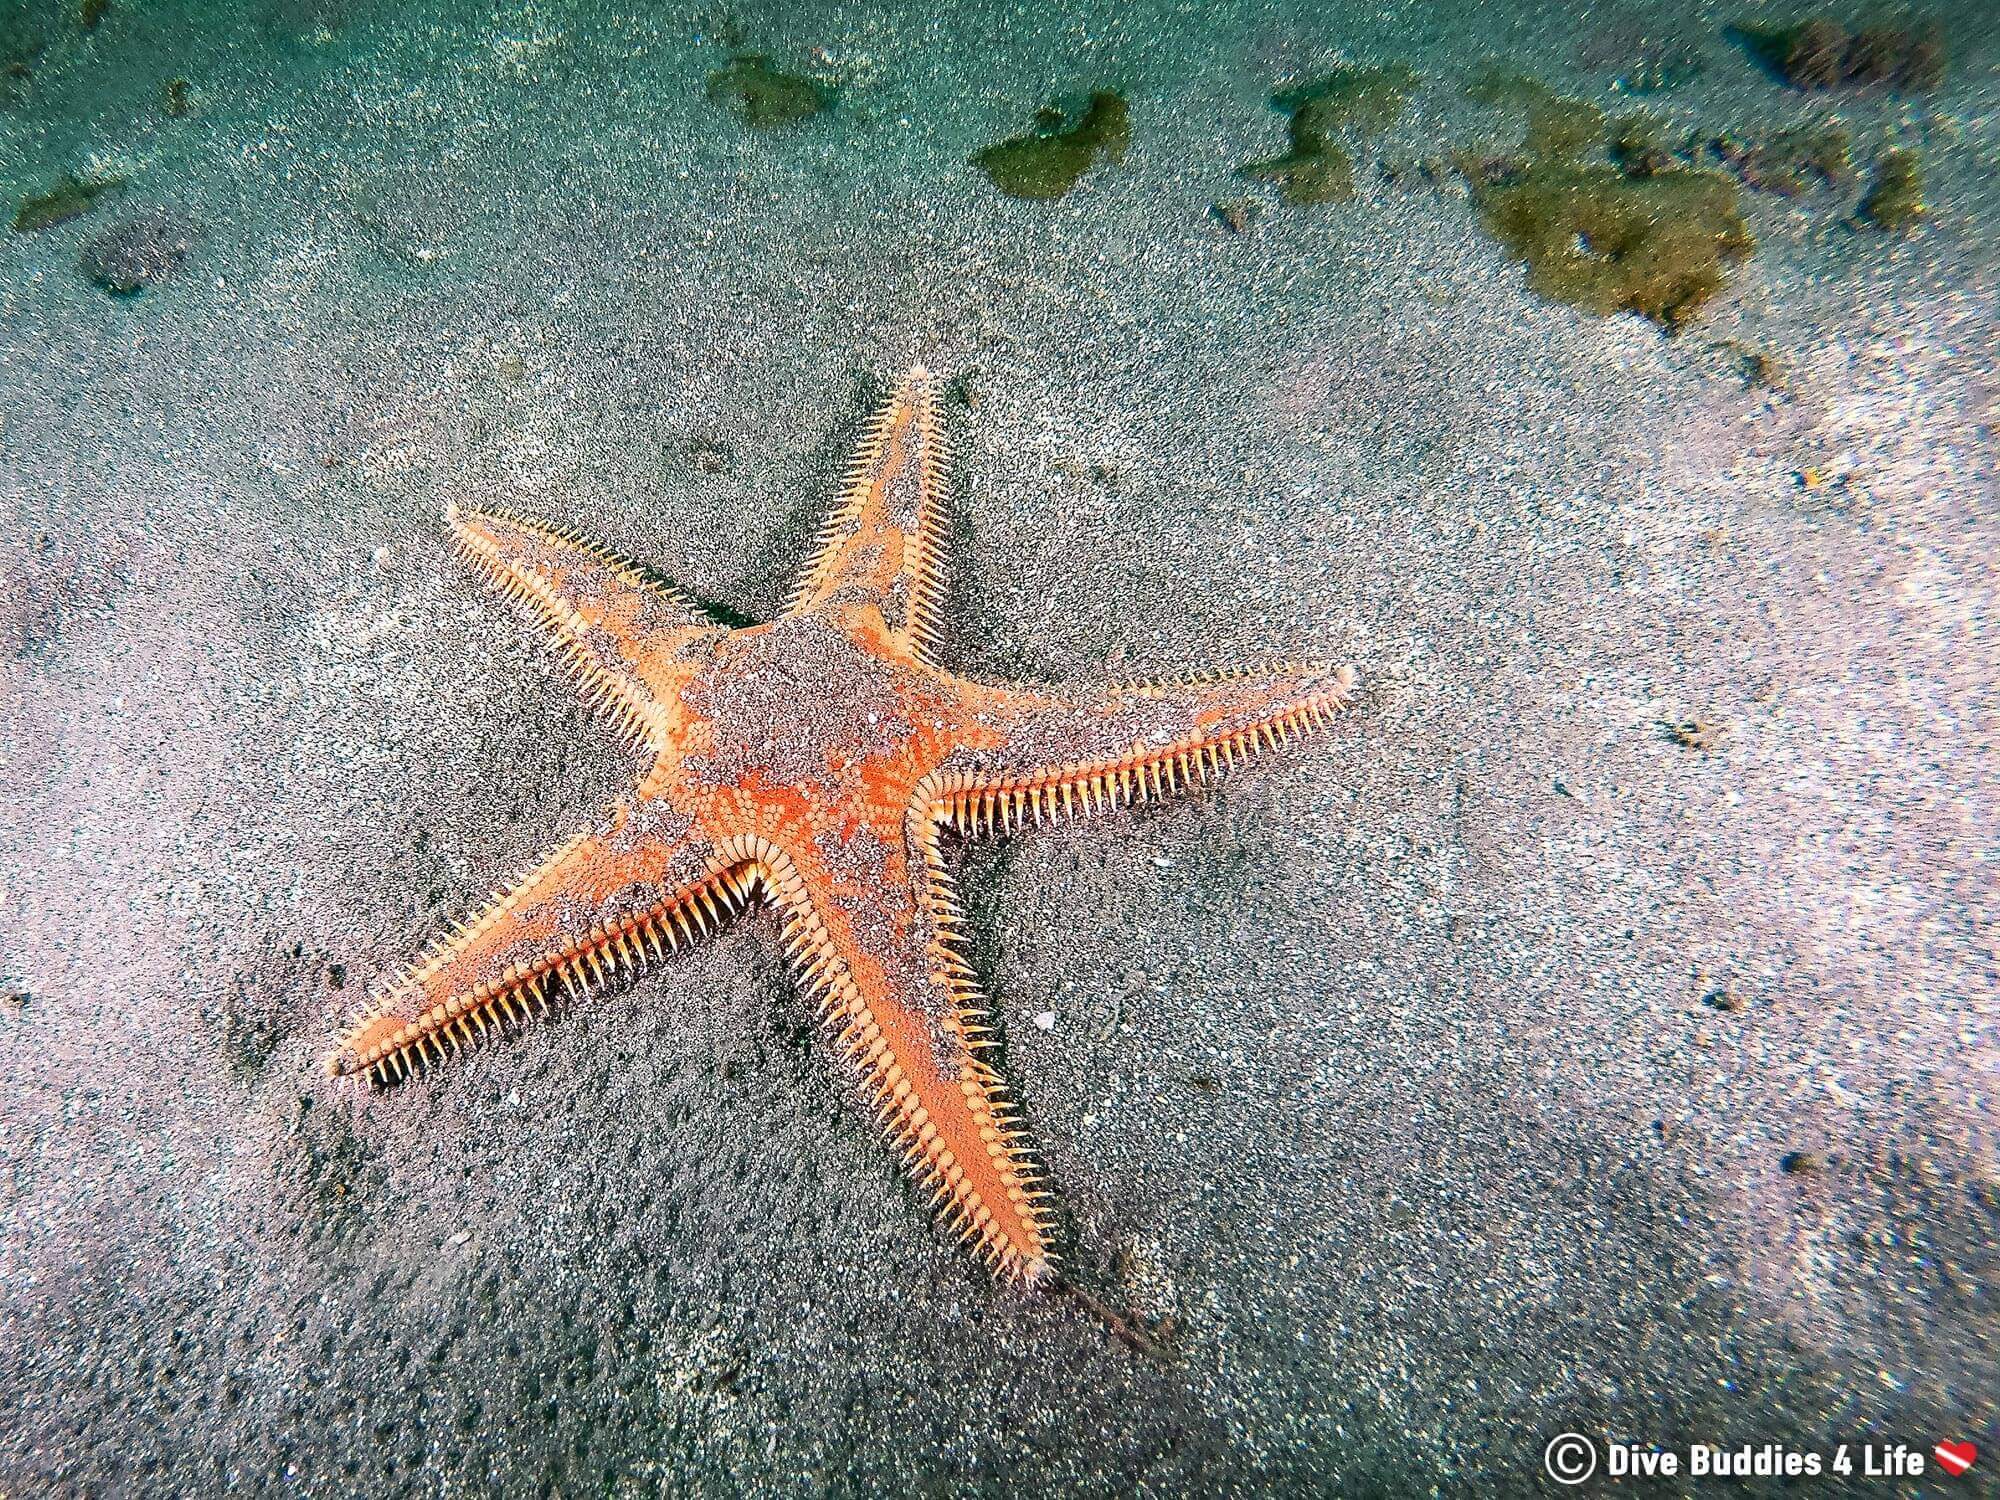 Scuba Diving Costa Del Sol And Finding A Big Sea Star On The Bottom Of The Ocean, Spain, Europe